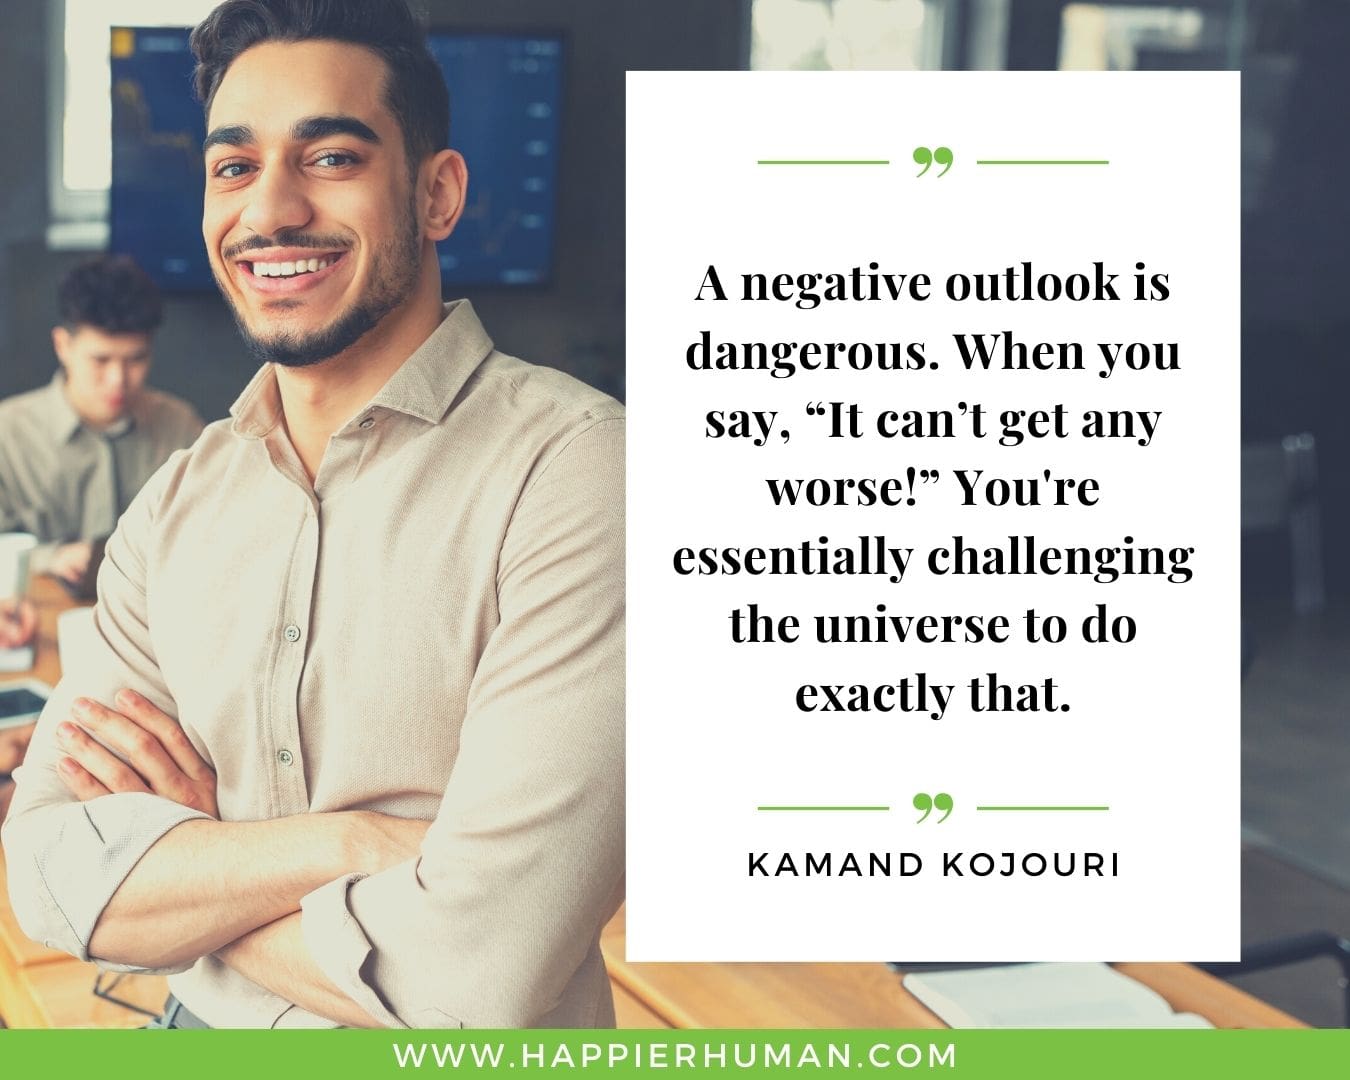 Positive Energy Quotes - “A negative outlook is dangerous. When you say, “It can’t get any worse!” You're essentially challenging the universe to do exactly that.” - Kamand Kojouri